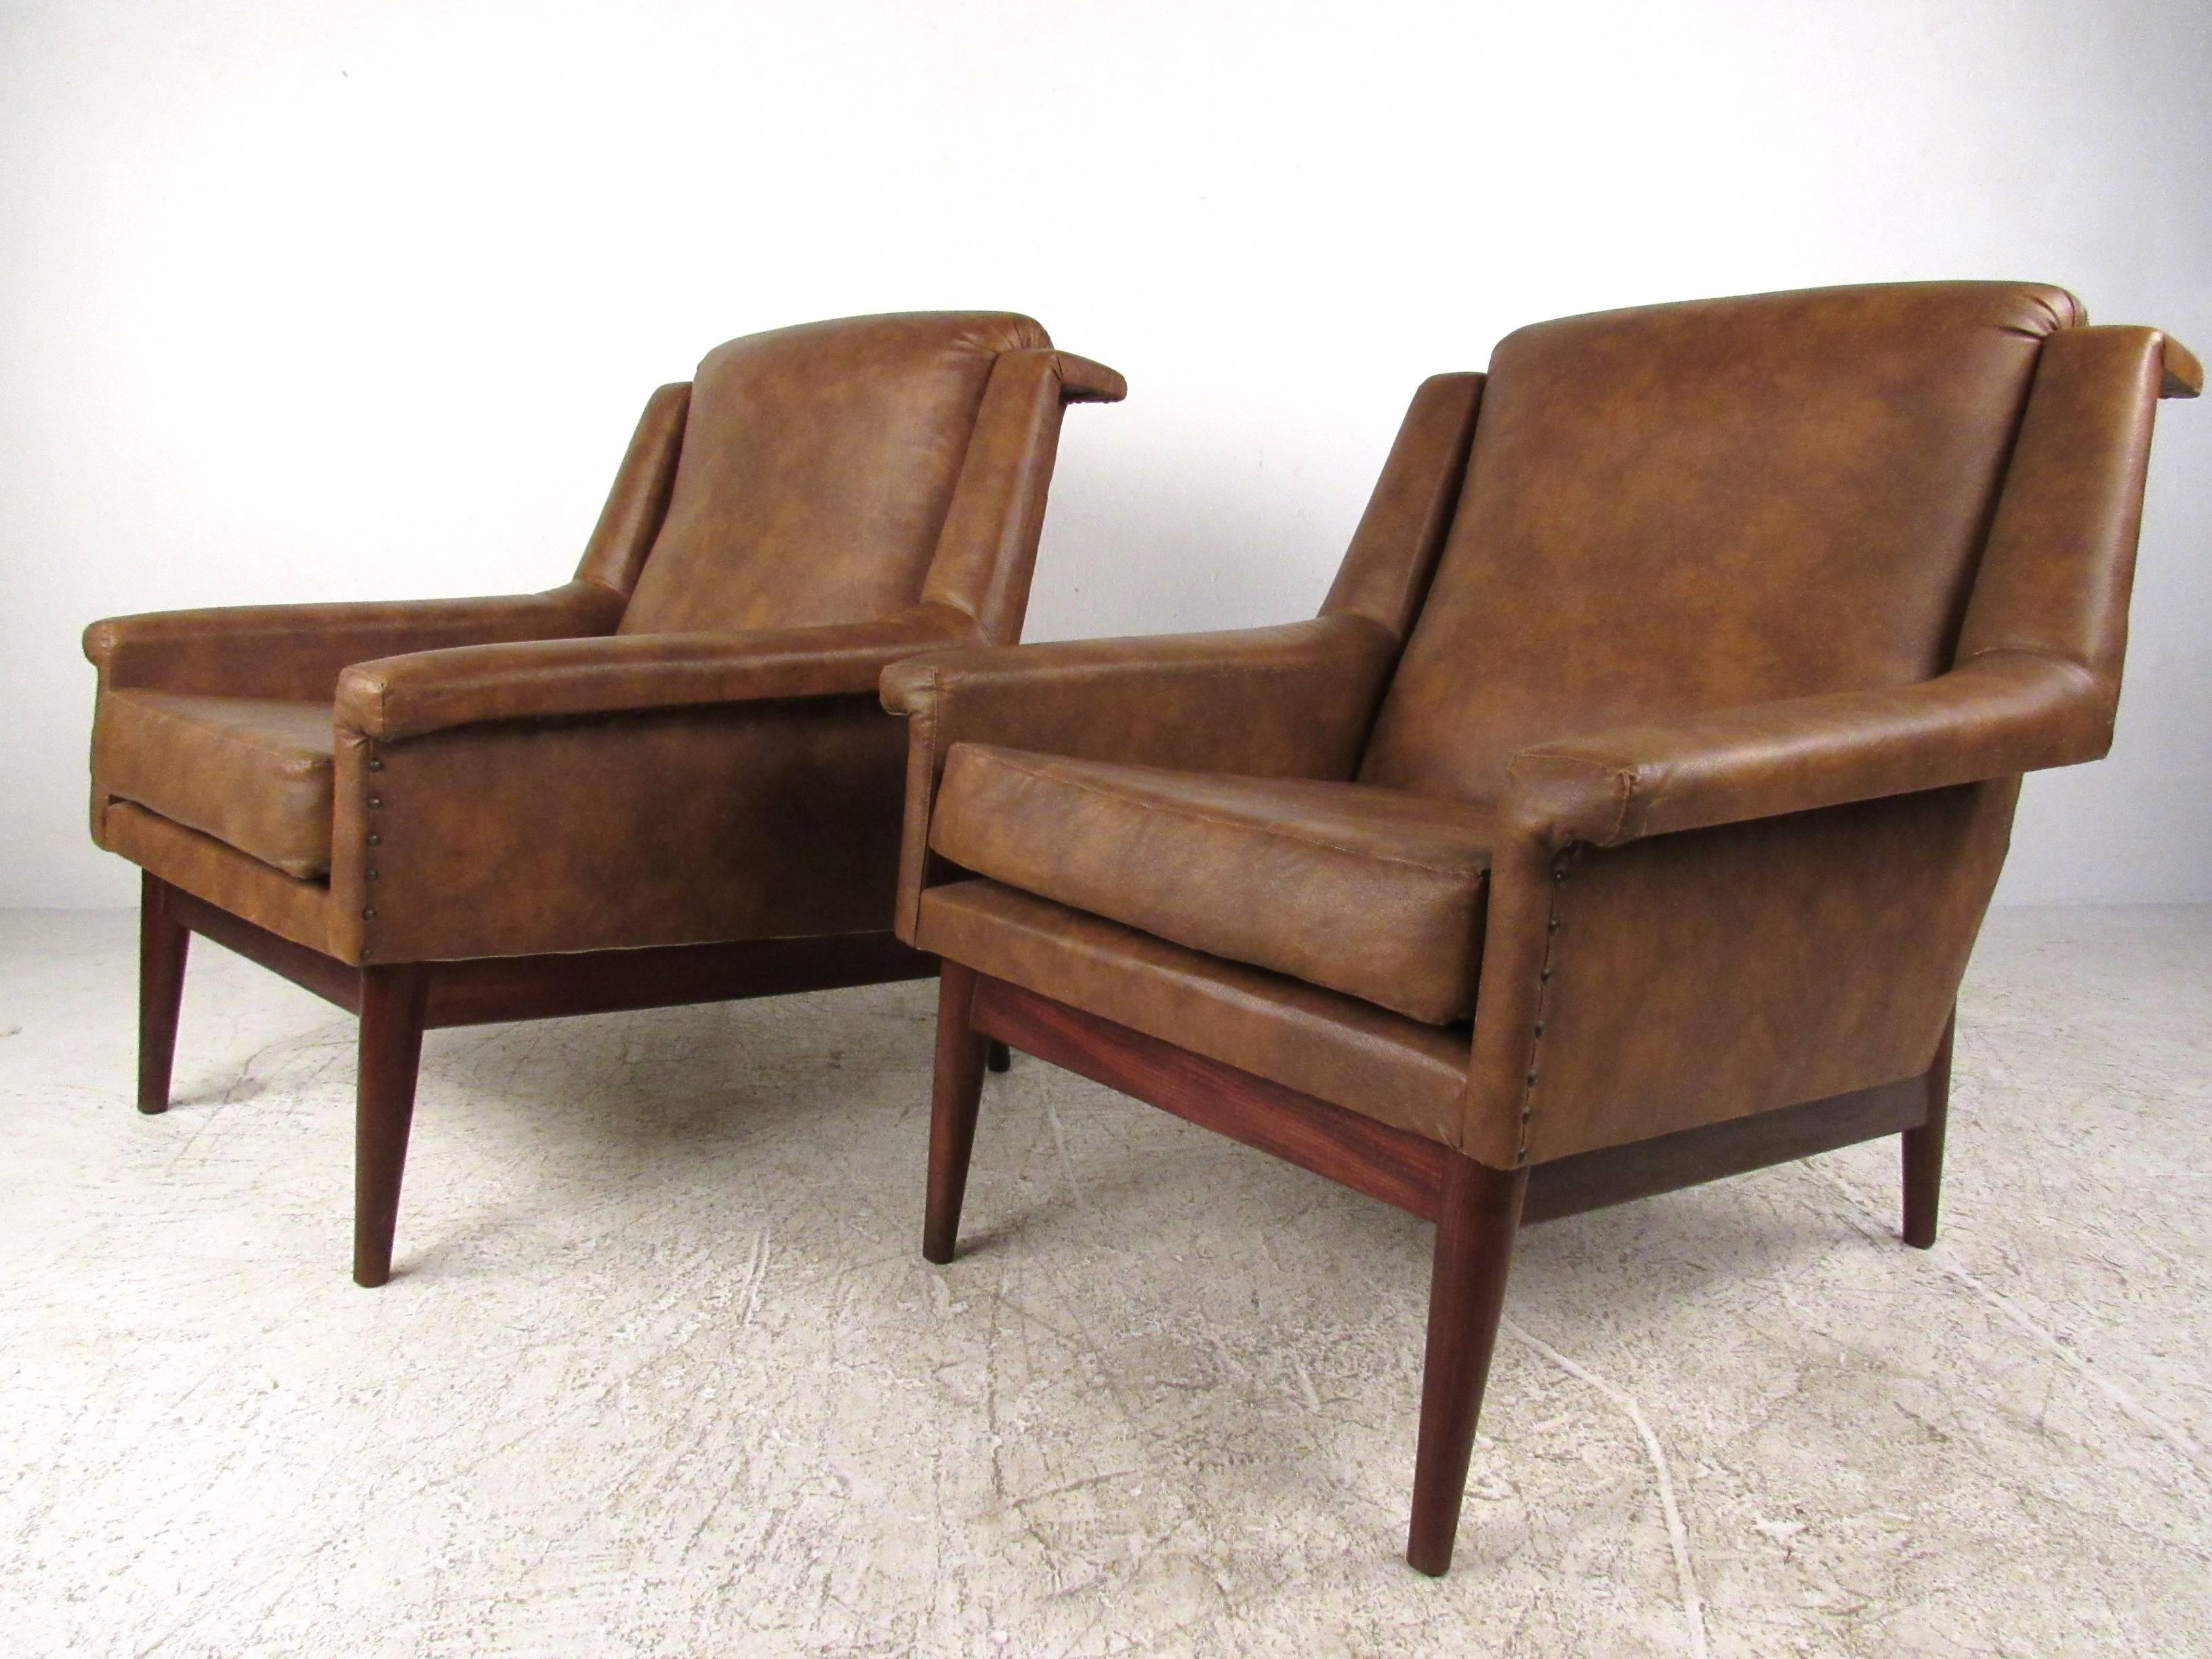 This unique pair of vintage vinyl lounge chairs feature wide upholstered seats with unique sculpted armrests. Vintage vinyl with brass studs adds to the classic appeal of the pair, while tapered hardwood legs showcase the Mid-Century influence on